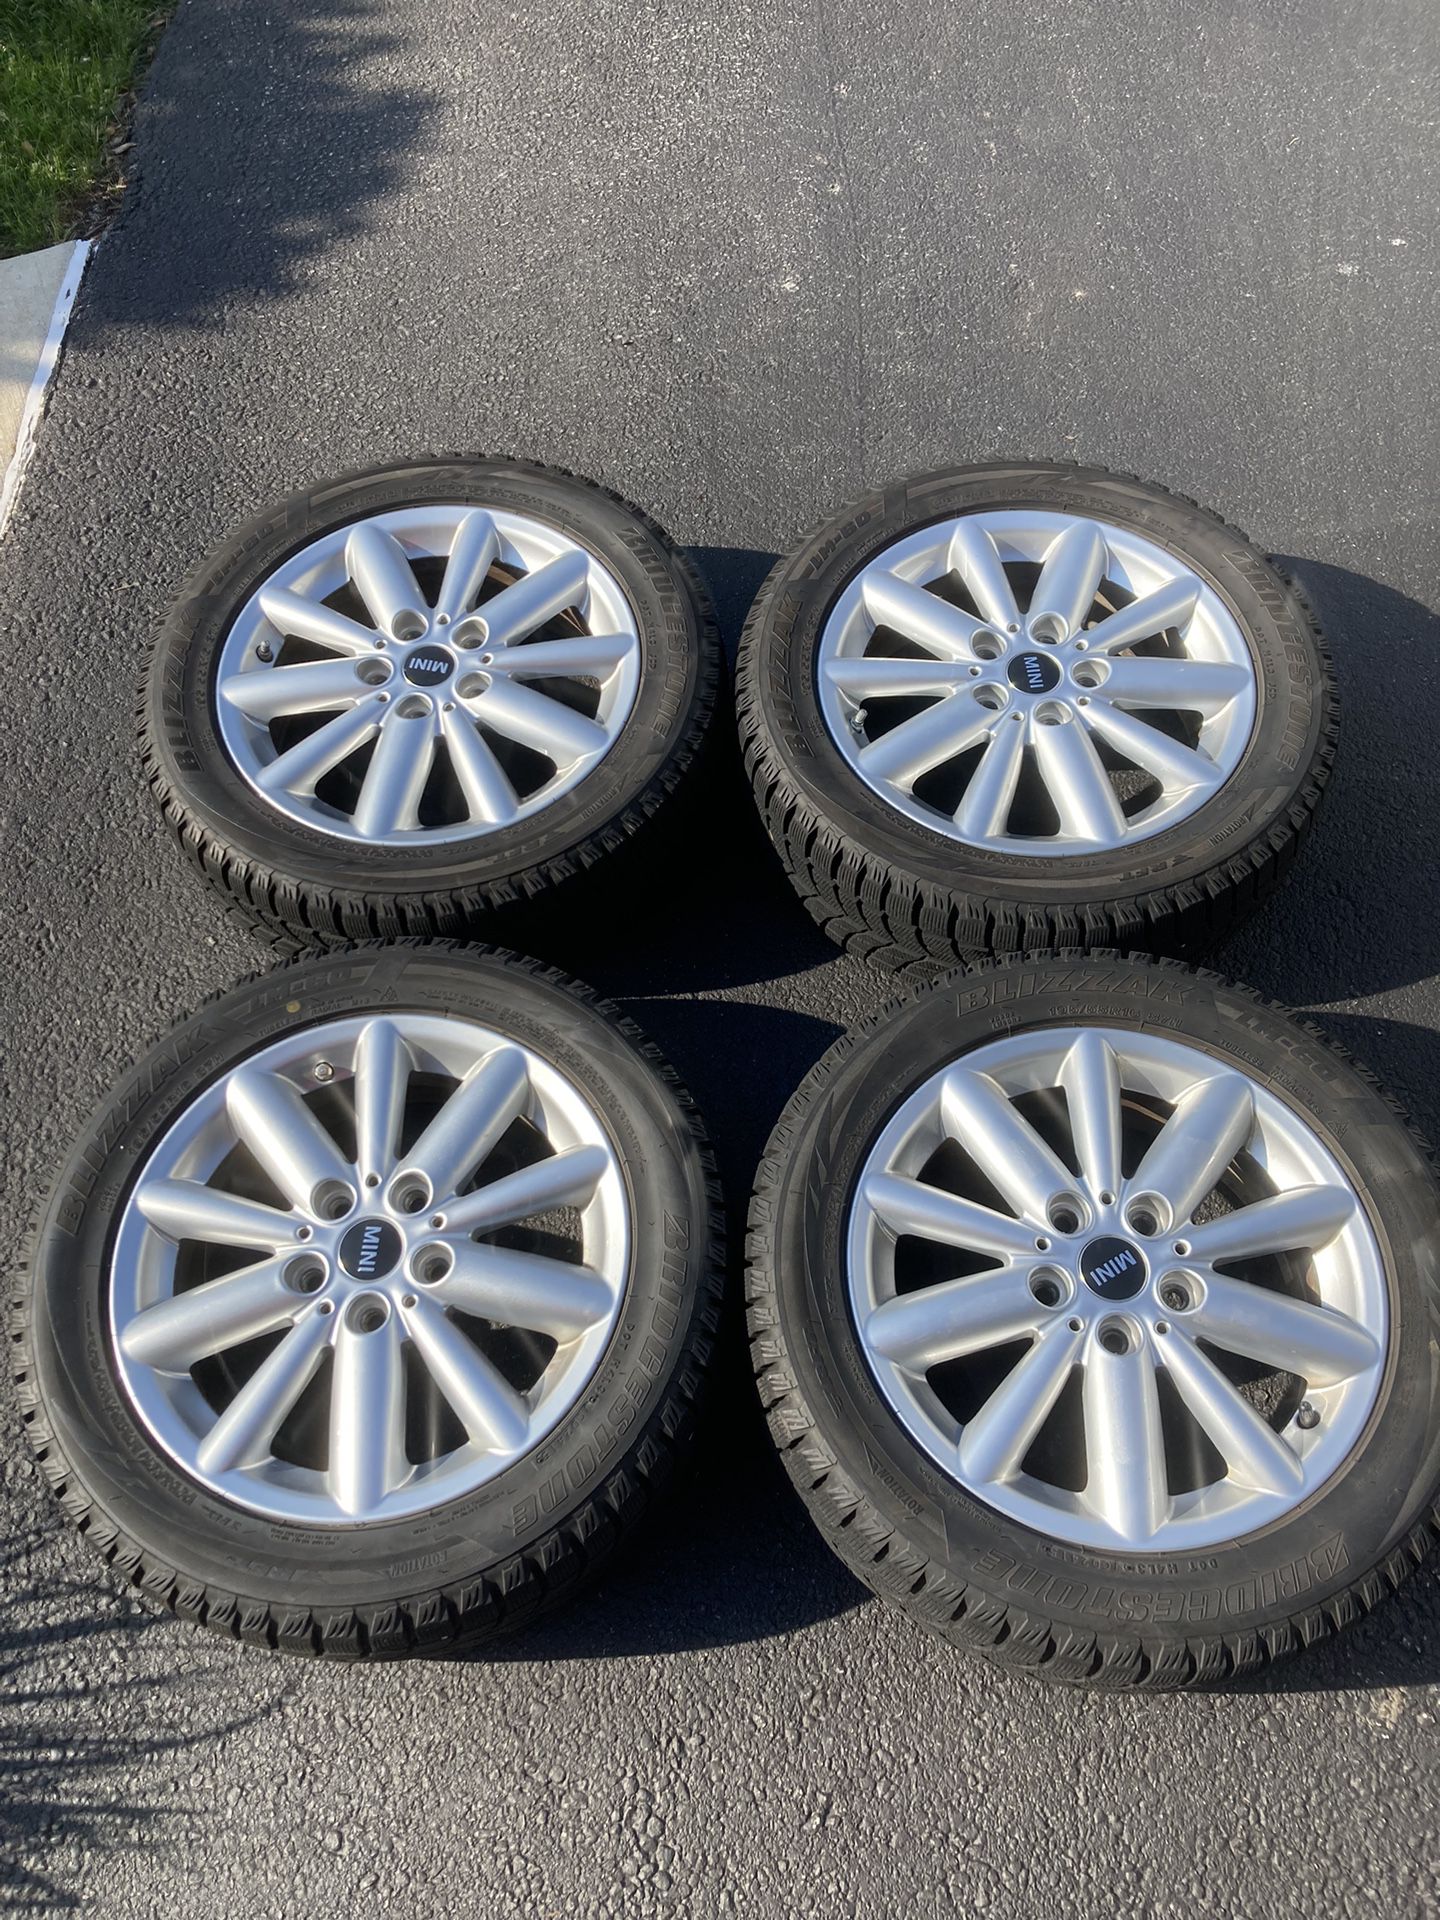 Mini Cooper Wheels And Winter Tires